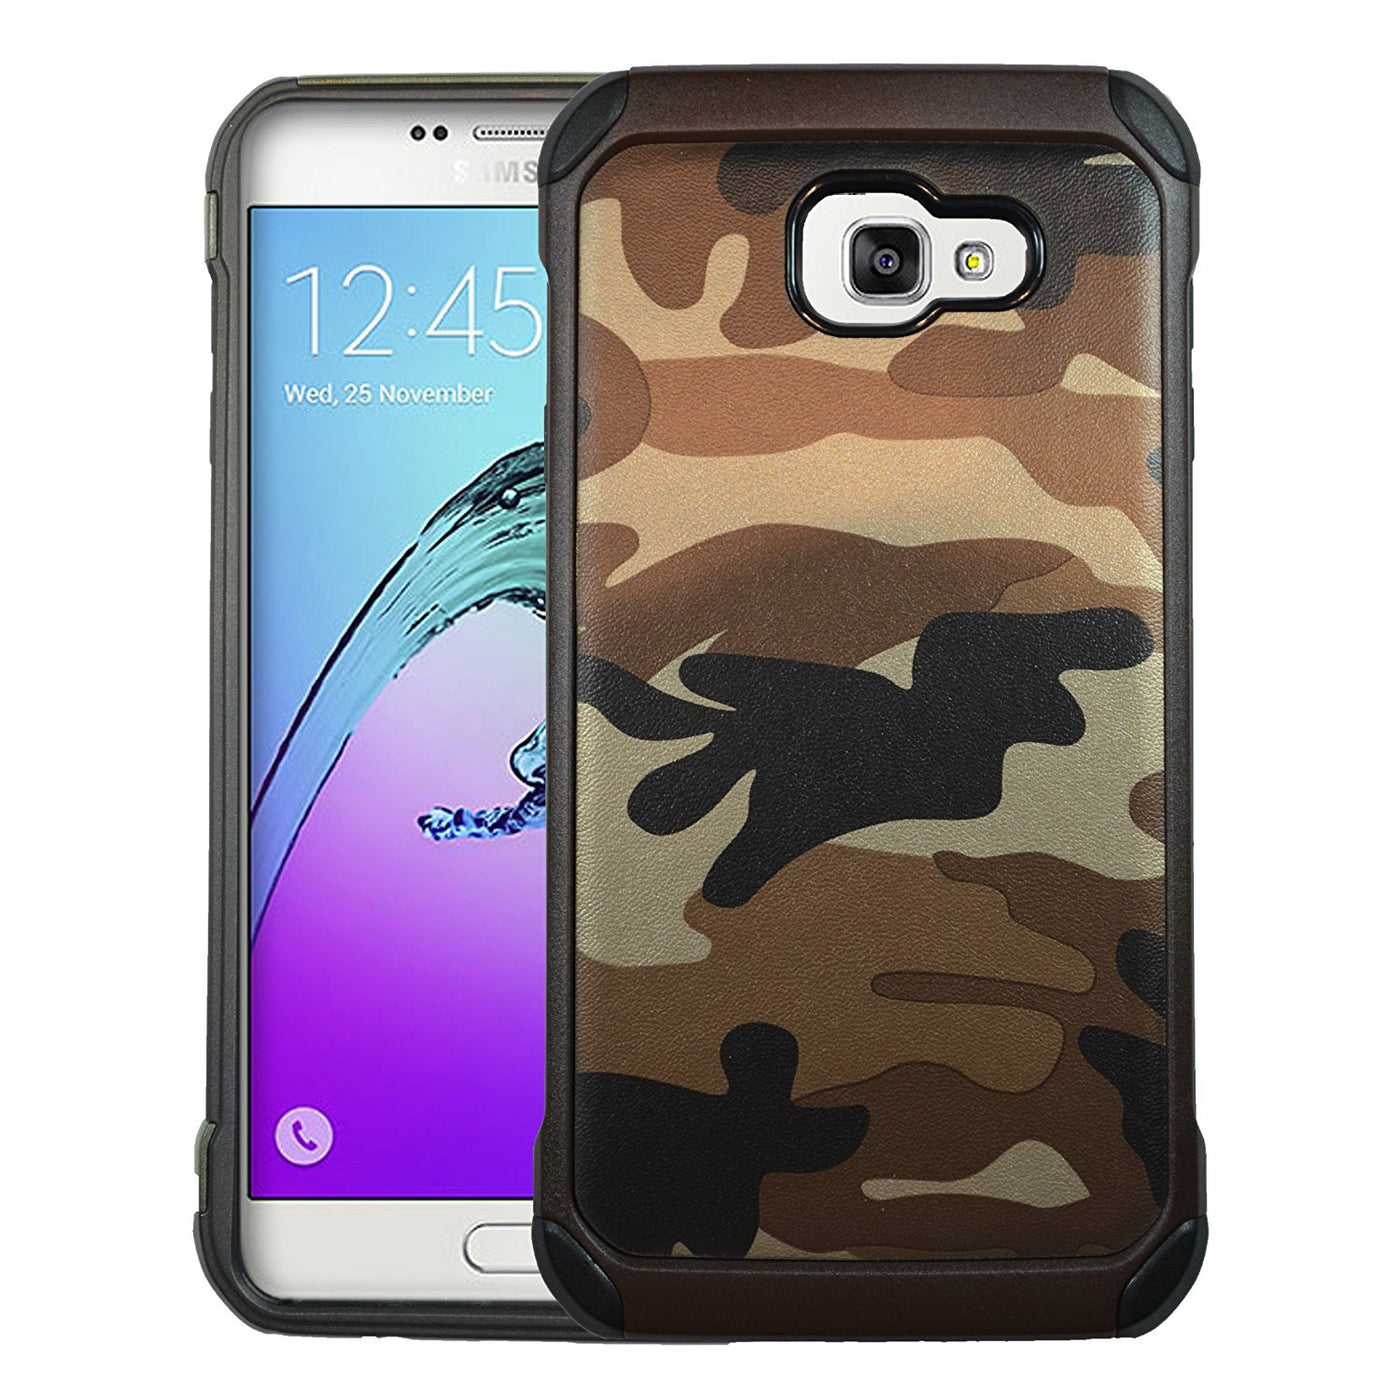 Samsung Galaxy A7 2017 high quality premium and unique designer leather case cover